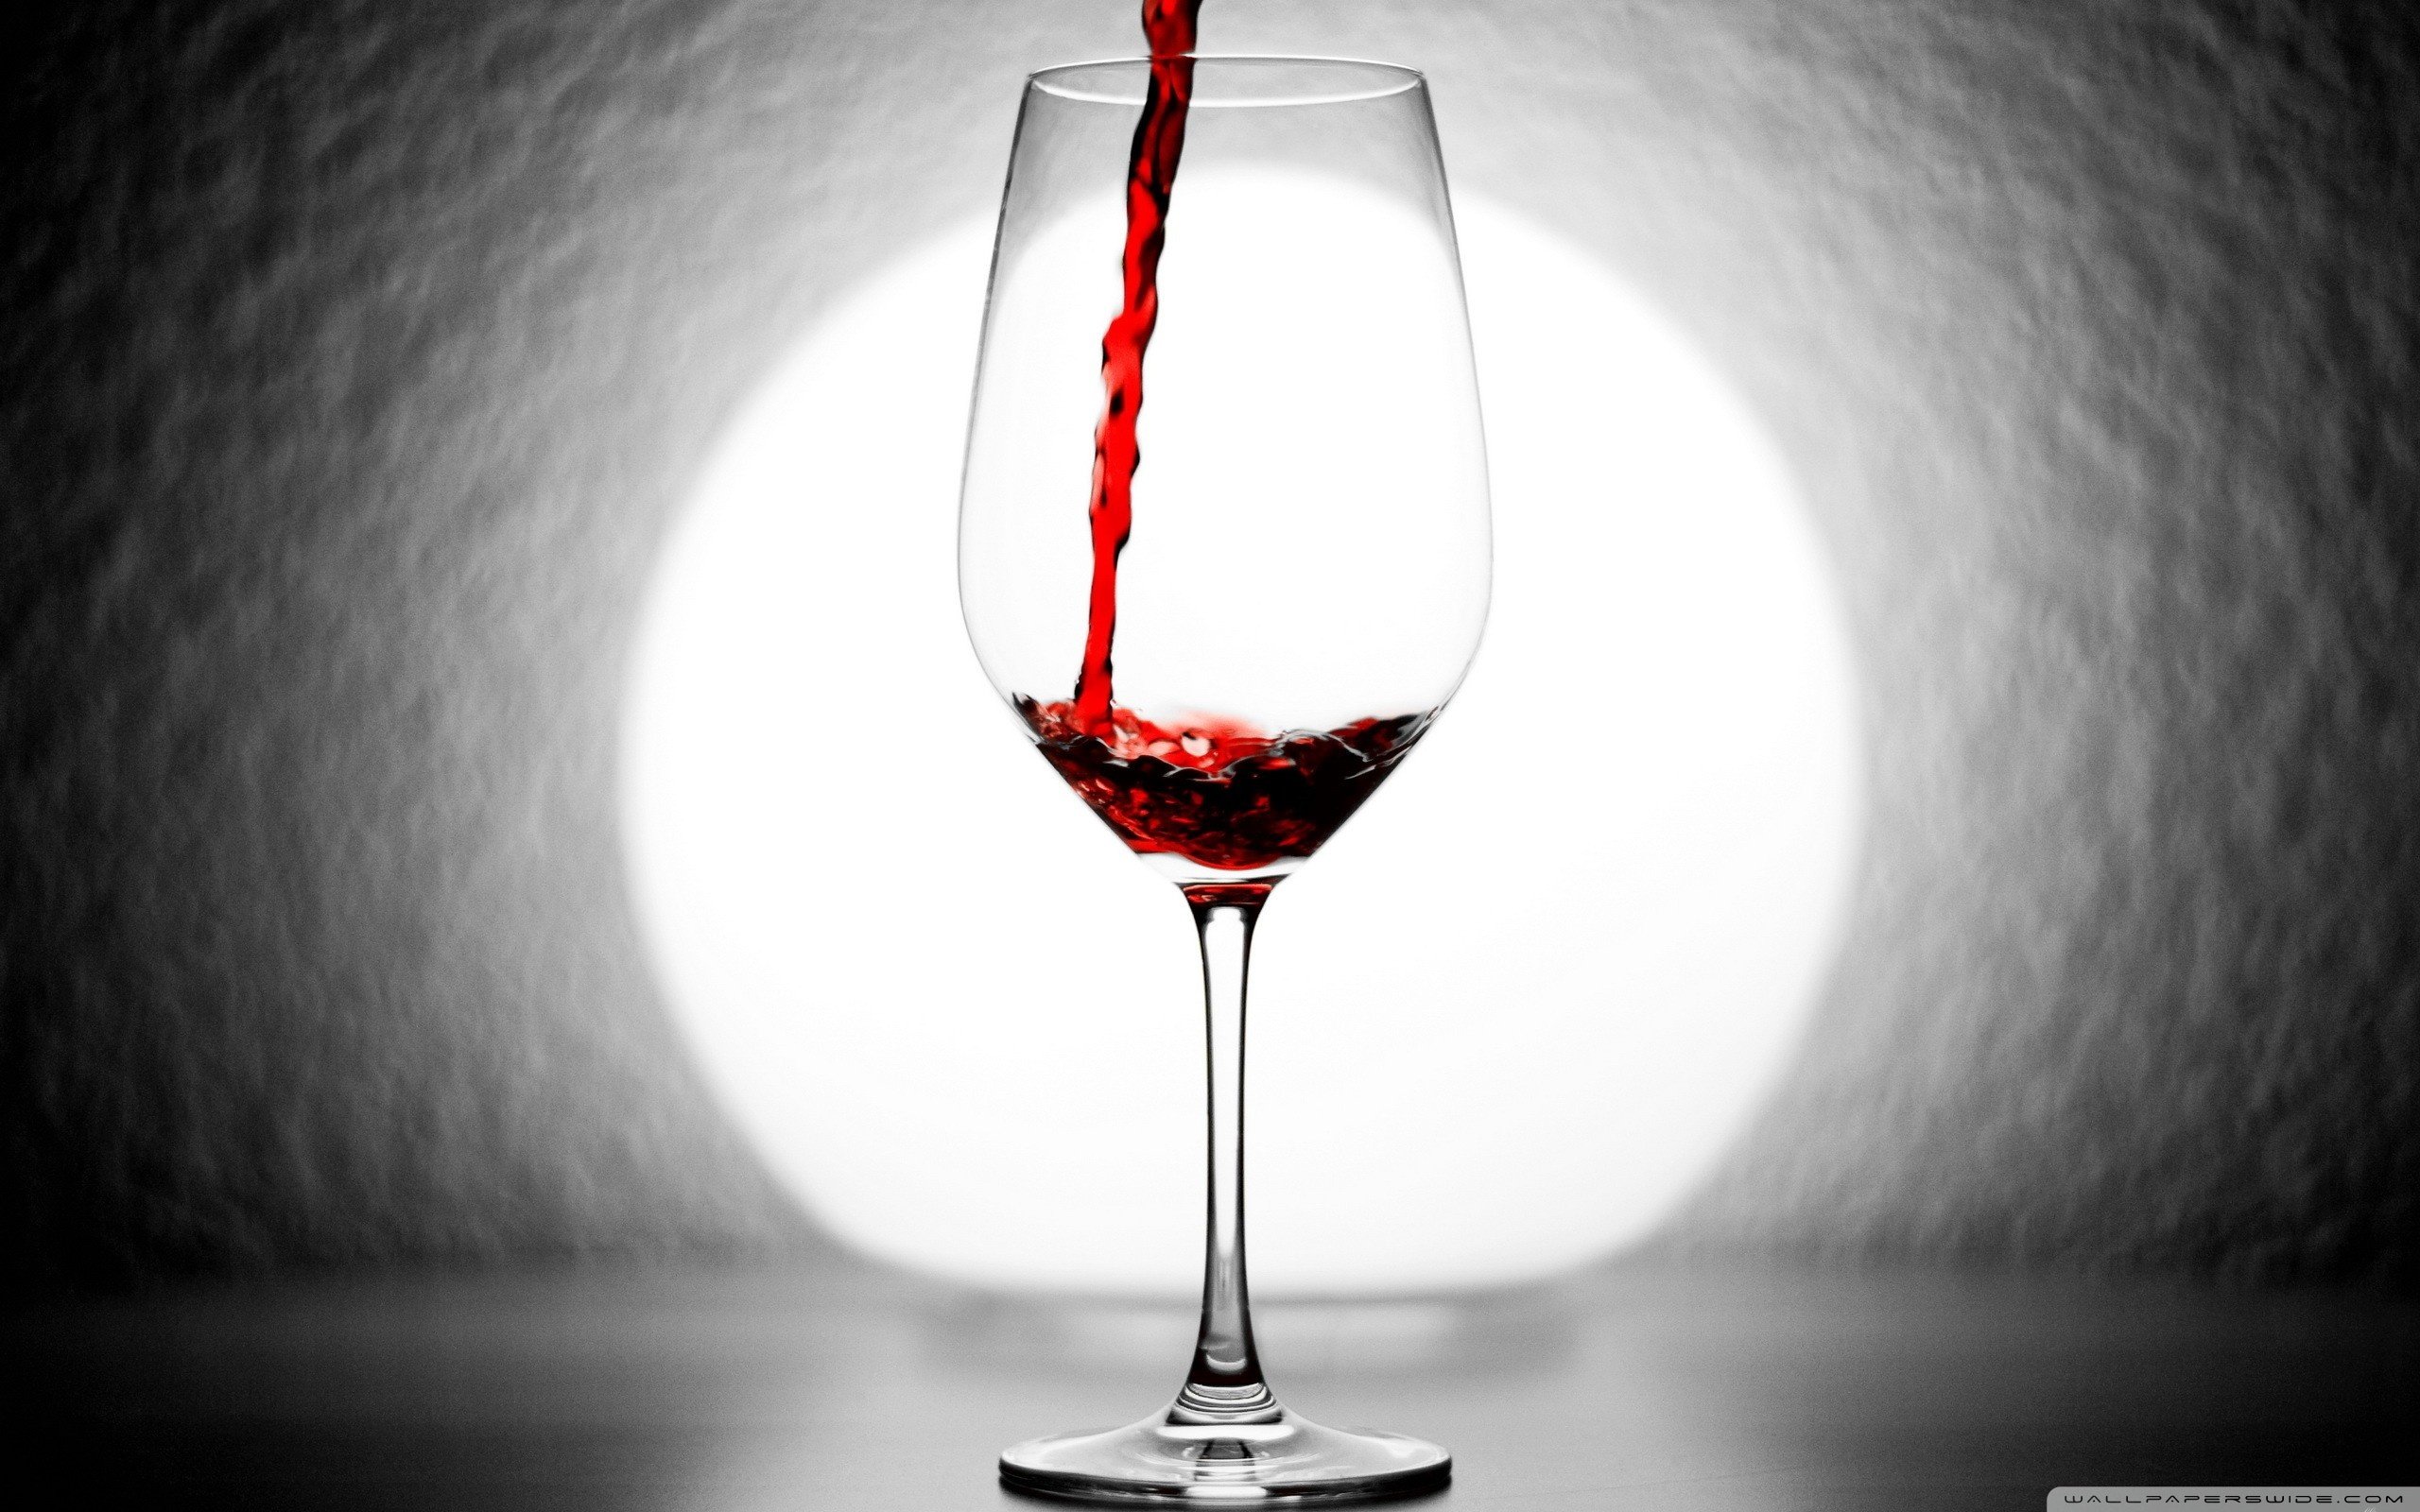 Glass of Red Wine Wallpaper HQ Free Wallpapers download high